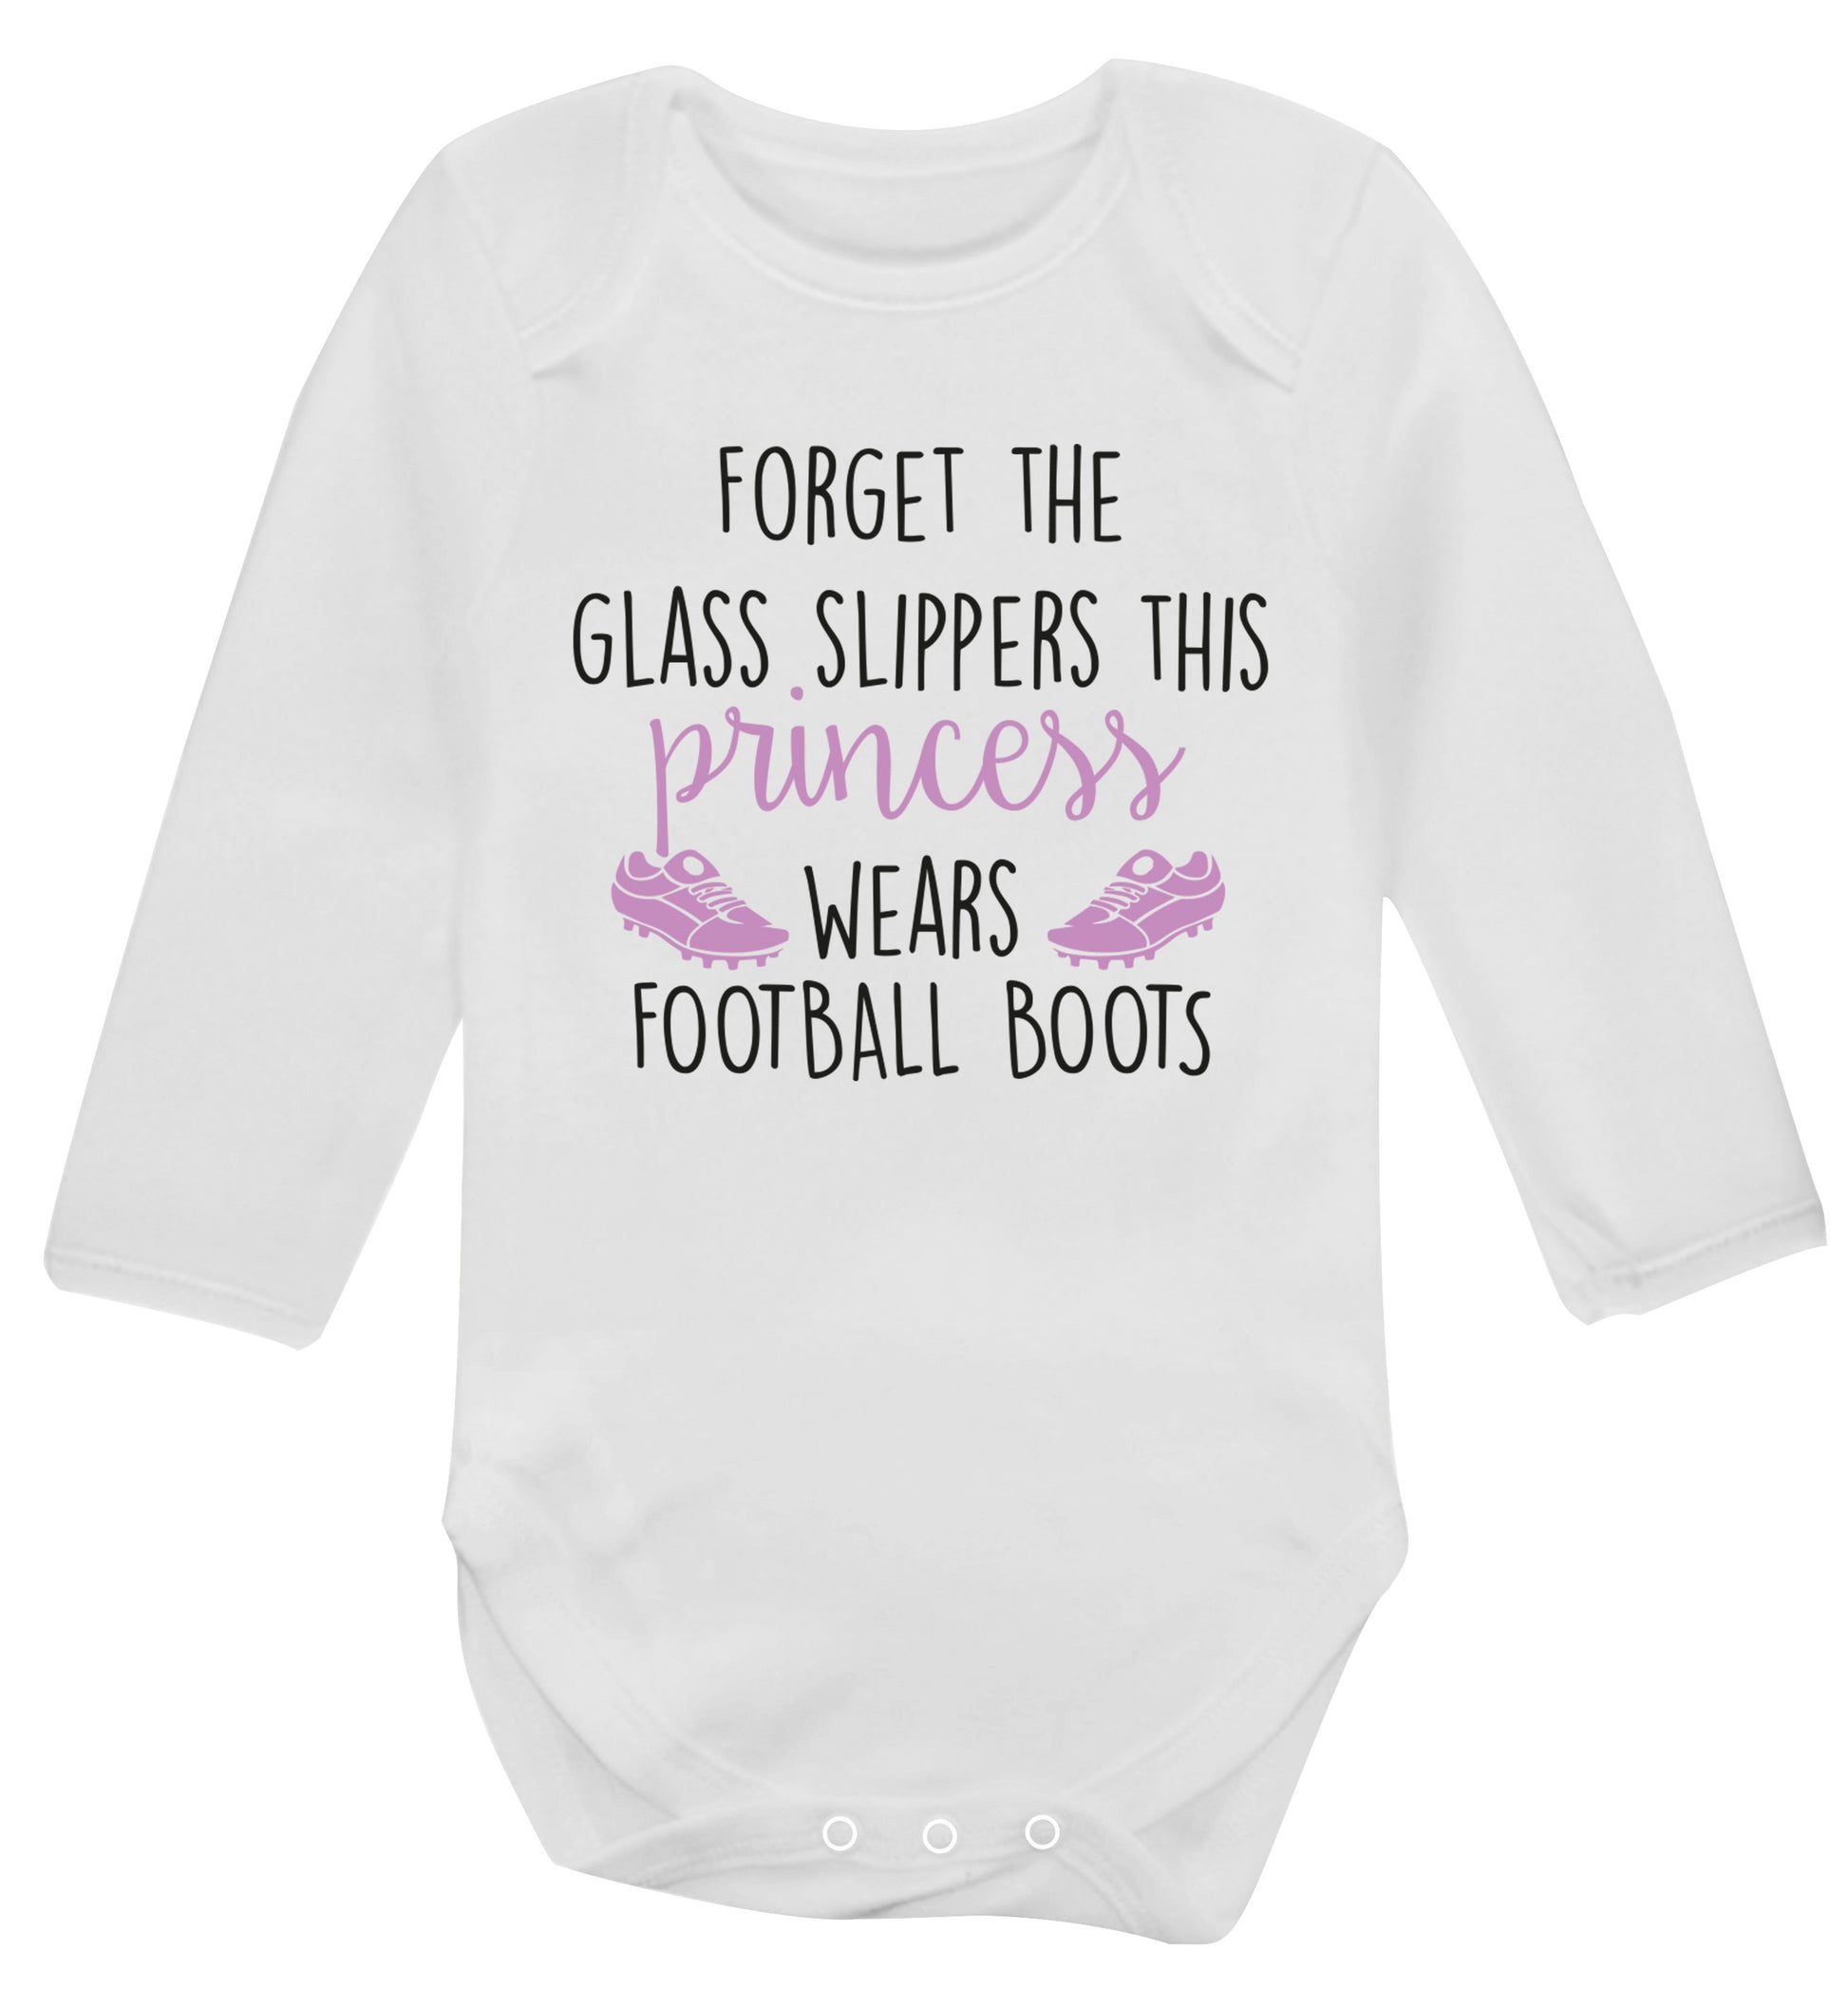 Forget the glass slippers this princess wears football boots Baby Vest long sleeved white 6-12 months